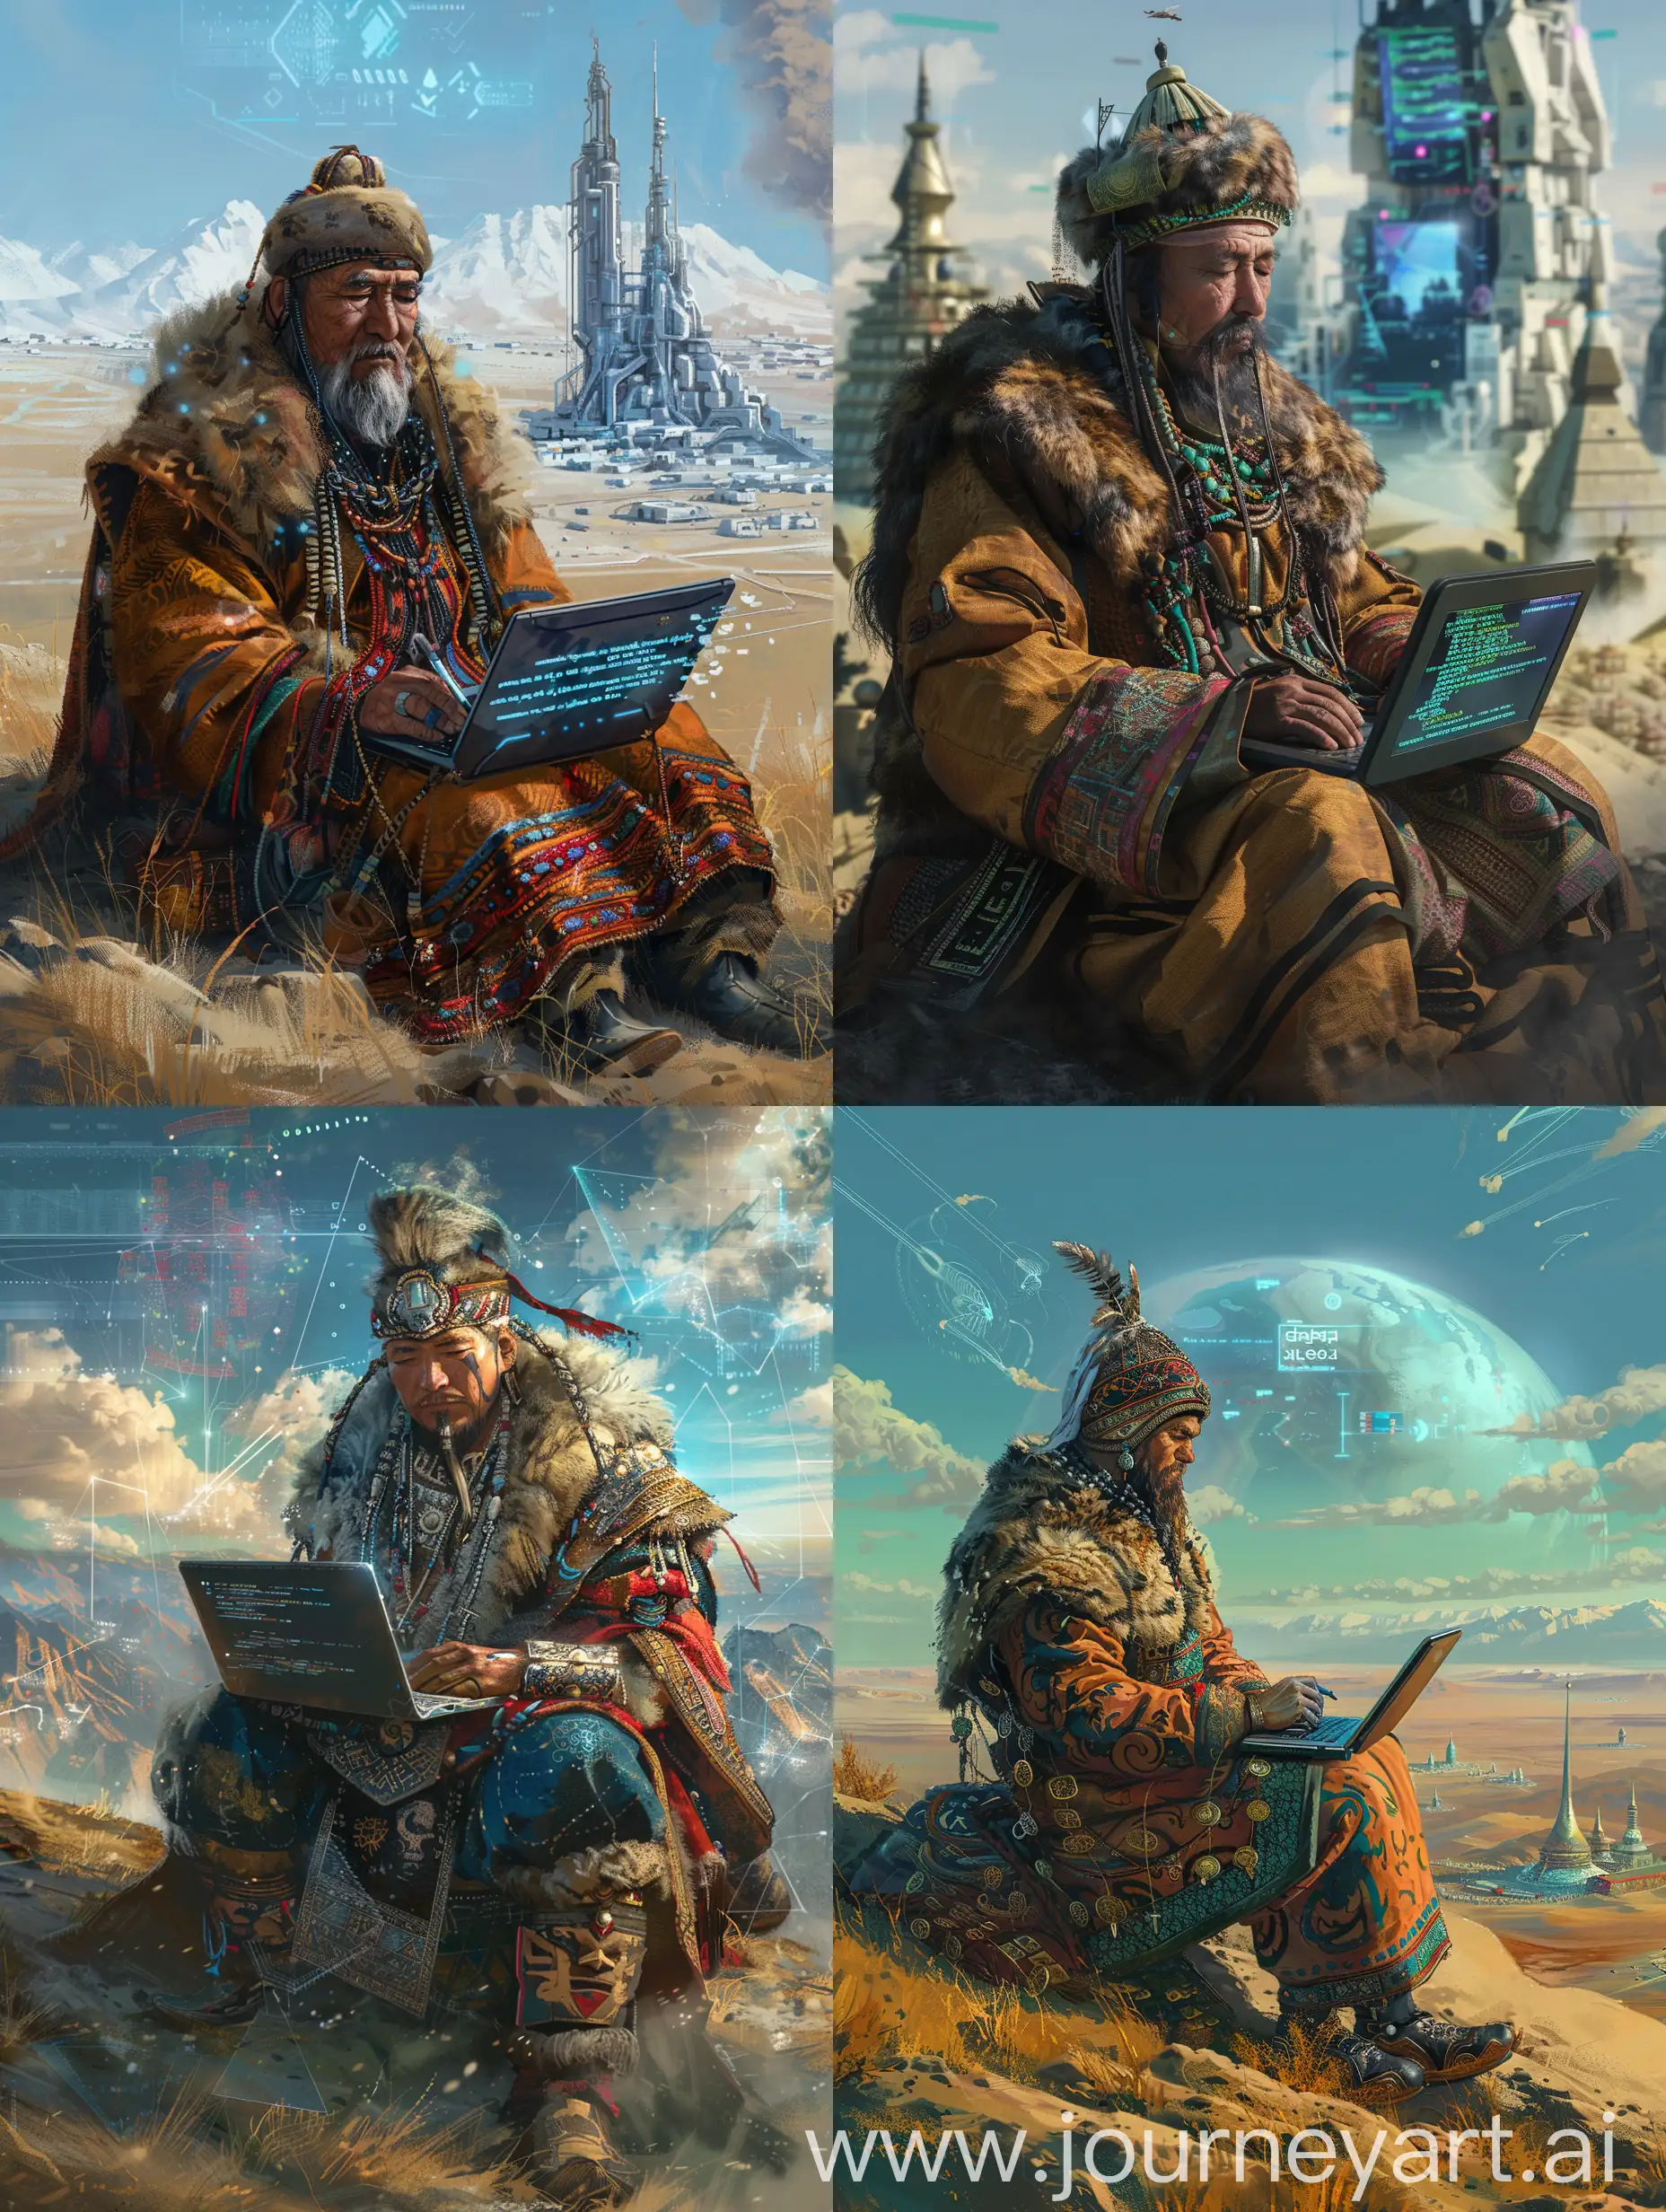 Create an image of a Kazakh batyr in a technological steppe, writing code on a laptop. The batyr should be dressed in traditional Kazakh warrior attire, surrounded by a landscape that blends elements of the vast steppe with high-tech features like digital holograms, futuristic devices, and advanced technology.